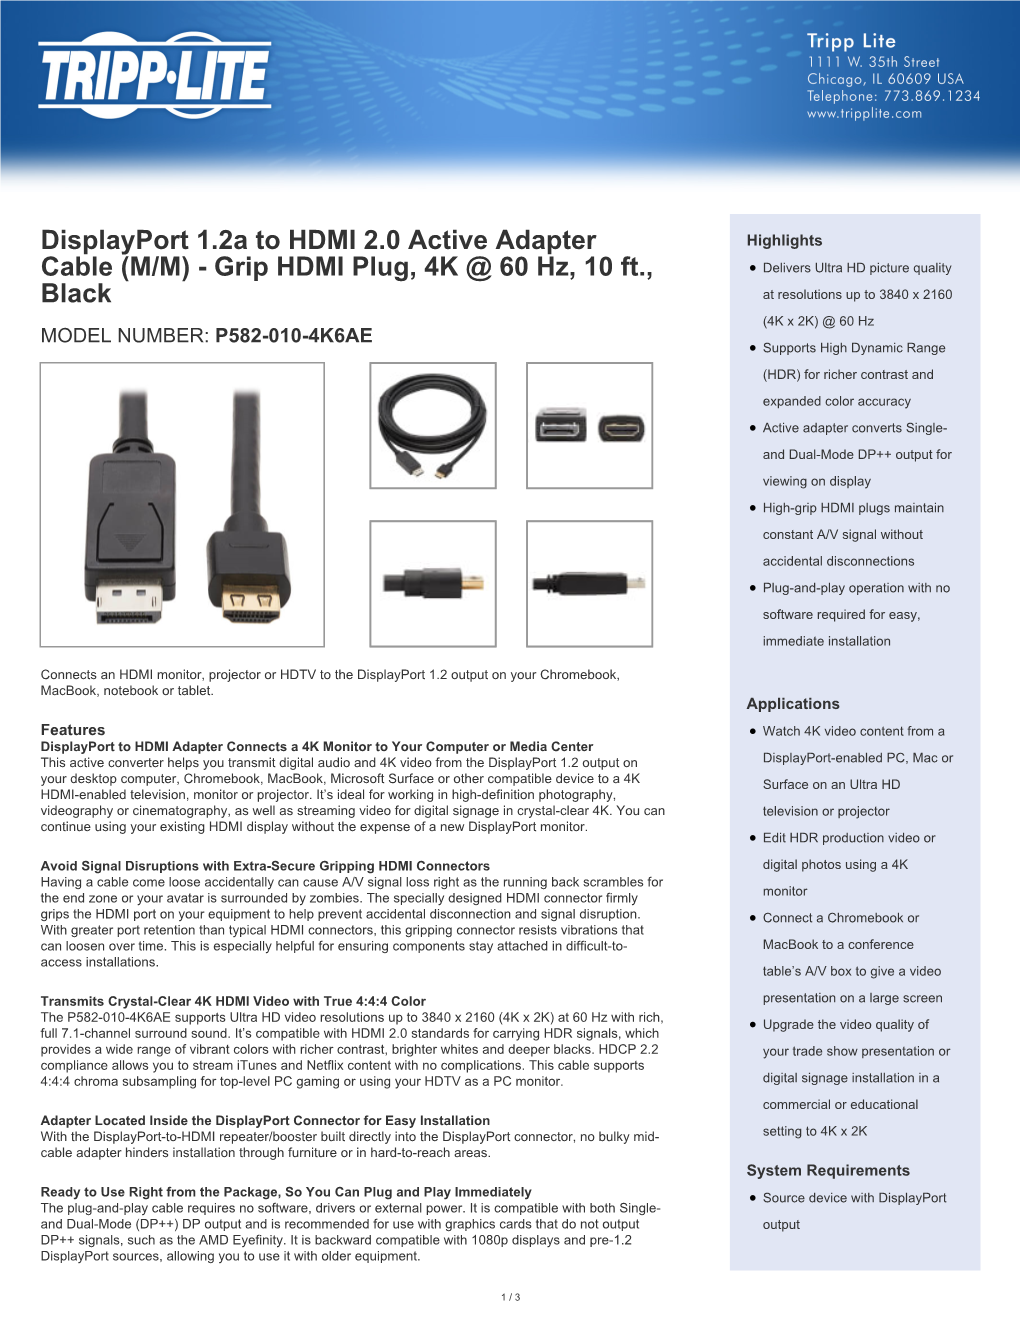 Displayport 1.2A to HDMI 2.0 Active Adapter Cable (M/M)